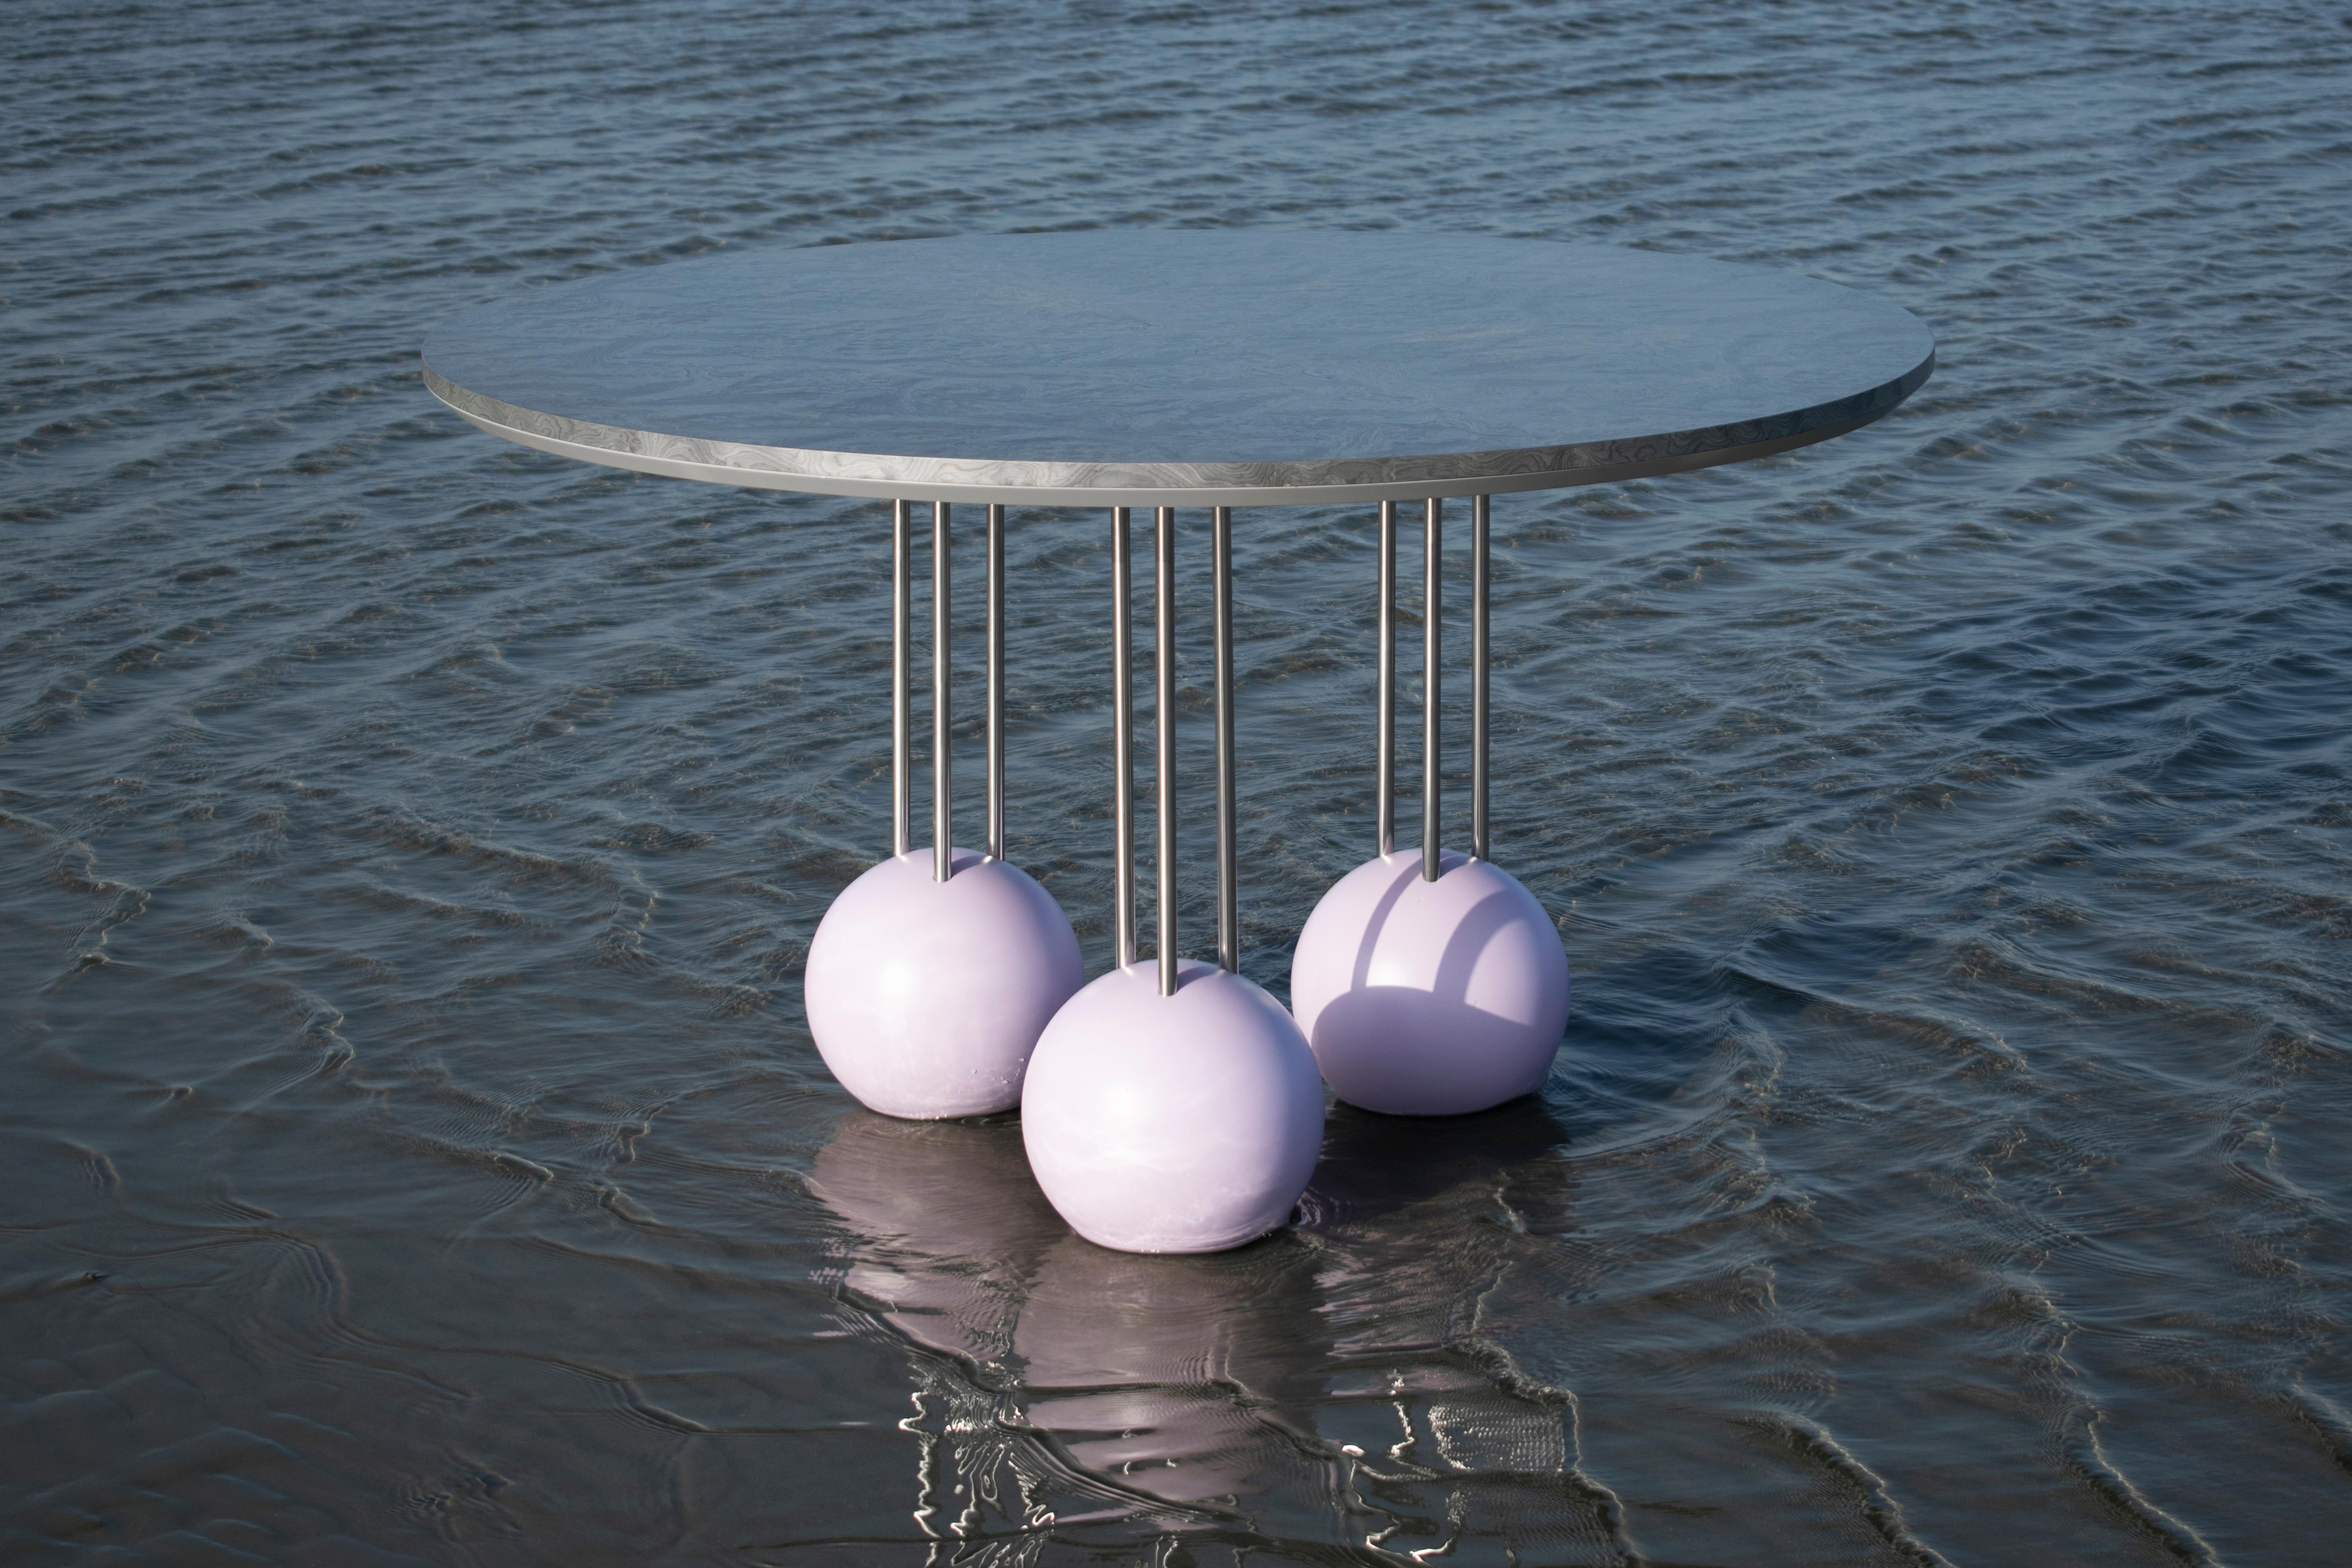 Wooden bulb veneer in silver colour, stainless steel stiles and Swedish pine solid wood spheres in lacquered pastel lilac colour.

Evolved out of its twin design, this high table’s surface reaches out to a standing height being ideal for a dining